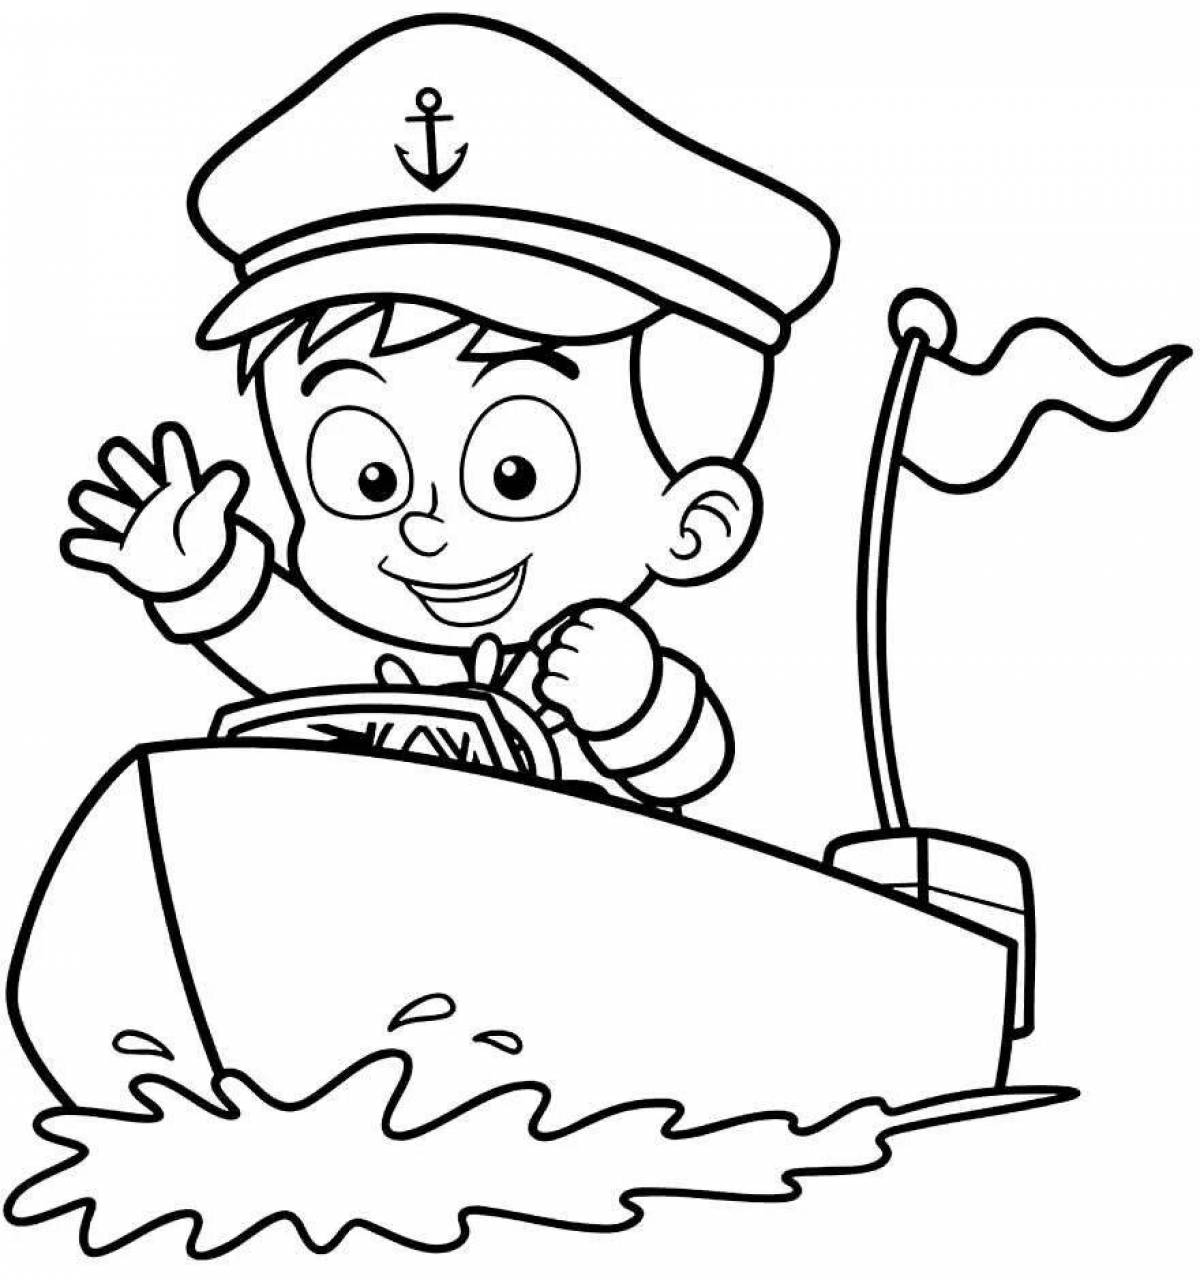 Awesome sailor coloring book